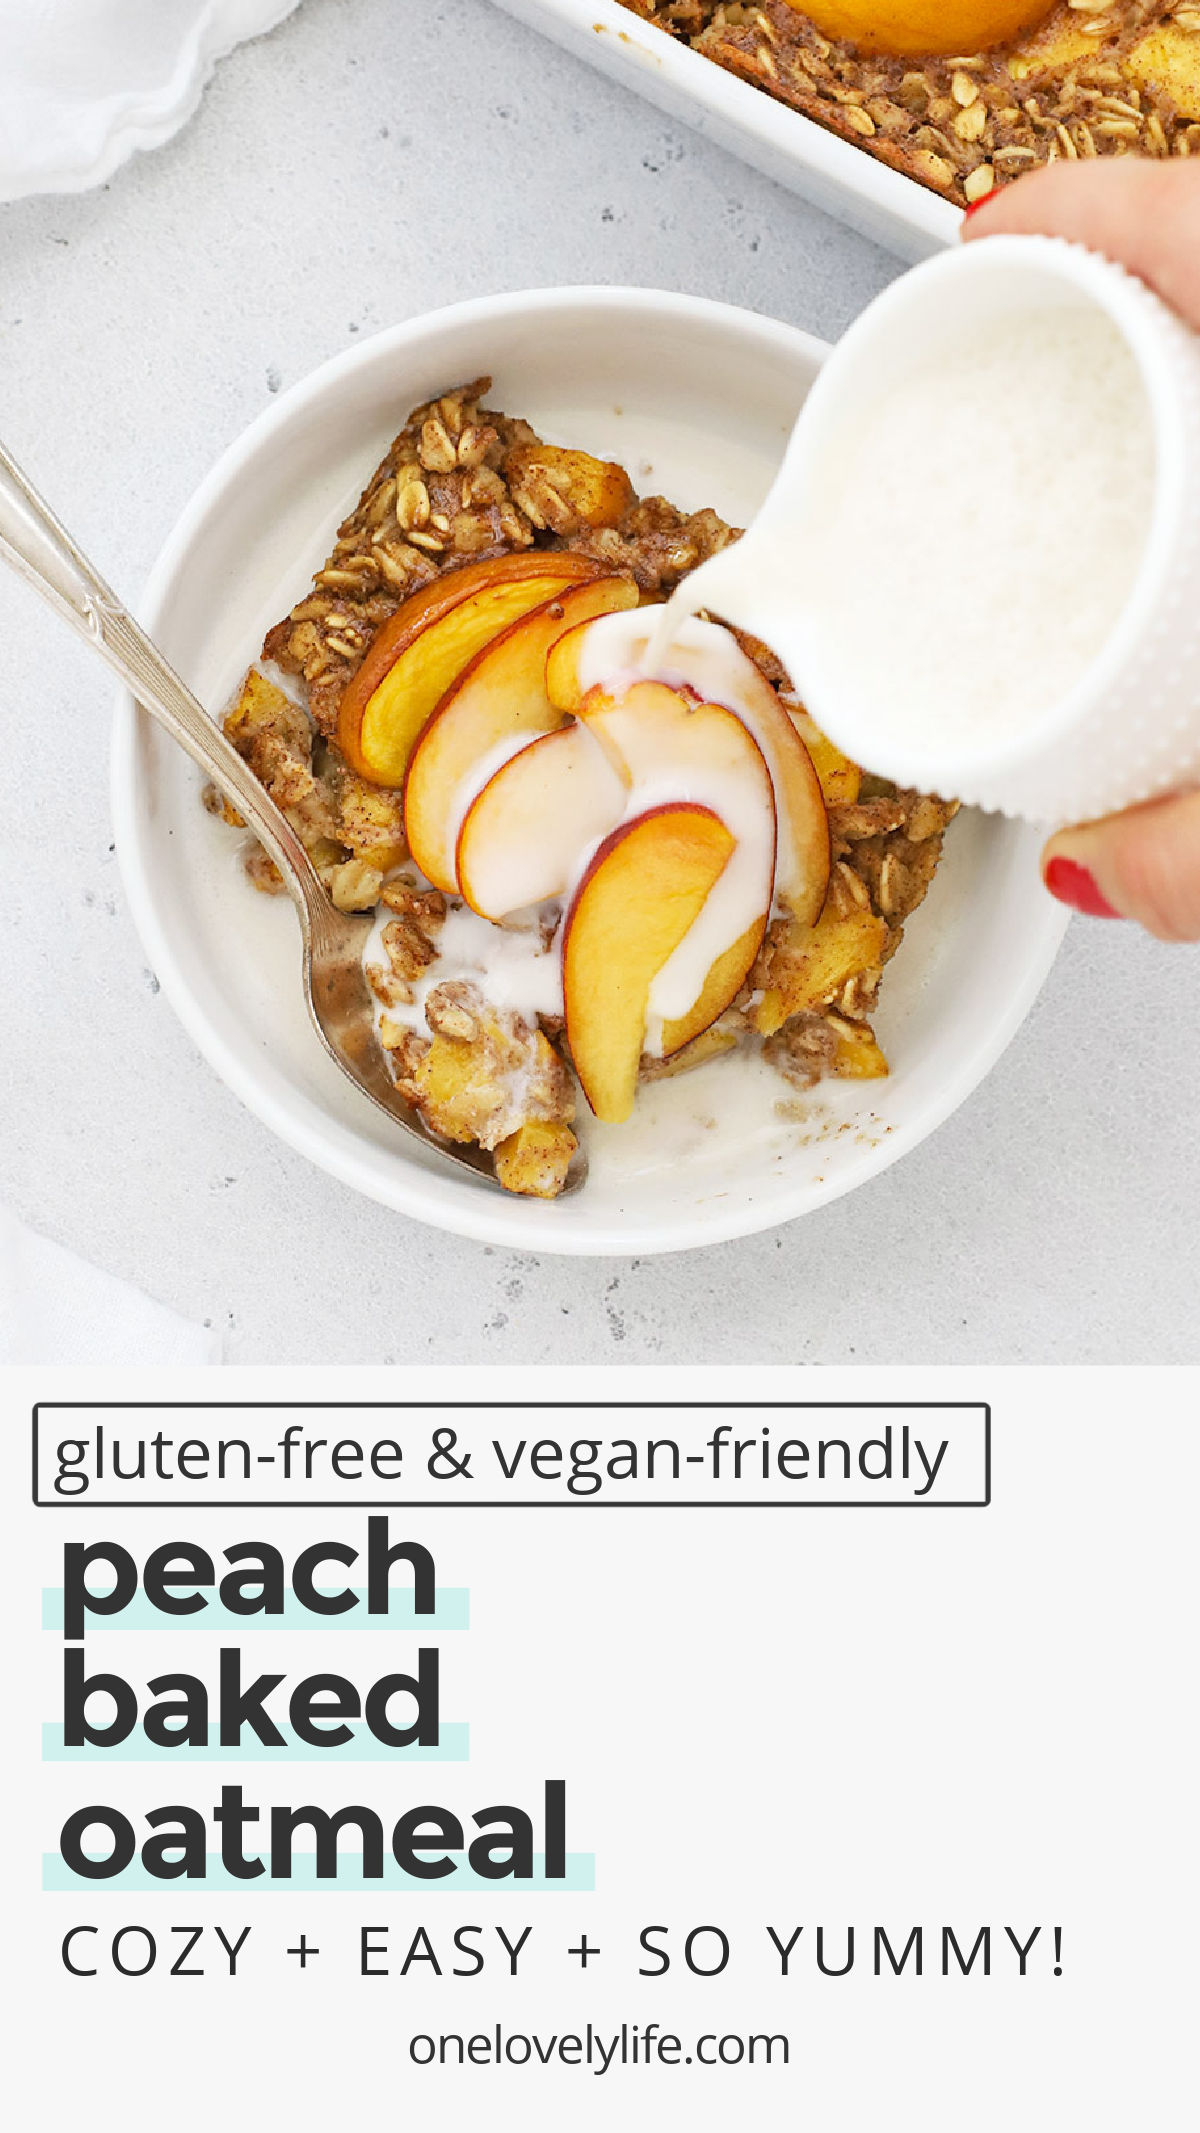 Peach Baked Oatmeal - Peach oatmeal made in the oven! This easy breakfast recipe is a lovely way to serve a crowd on a weekend and makes easy meal-prep breakfasts during the week. Don't miss all our toppings to try with it! (Gluten-Free, Vegan-Friendly) // peach oatmeal bake // peach oatmeal recipe // peach recipe // oatmeal // baked oatmeal // oatmeal bake // gluten free breakfast // meal prep breakfast // breakfast bake